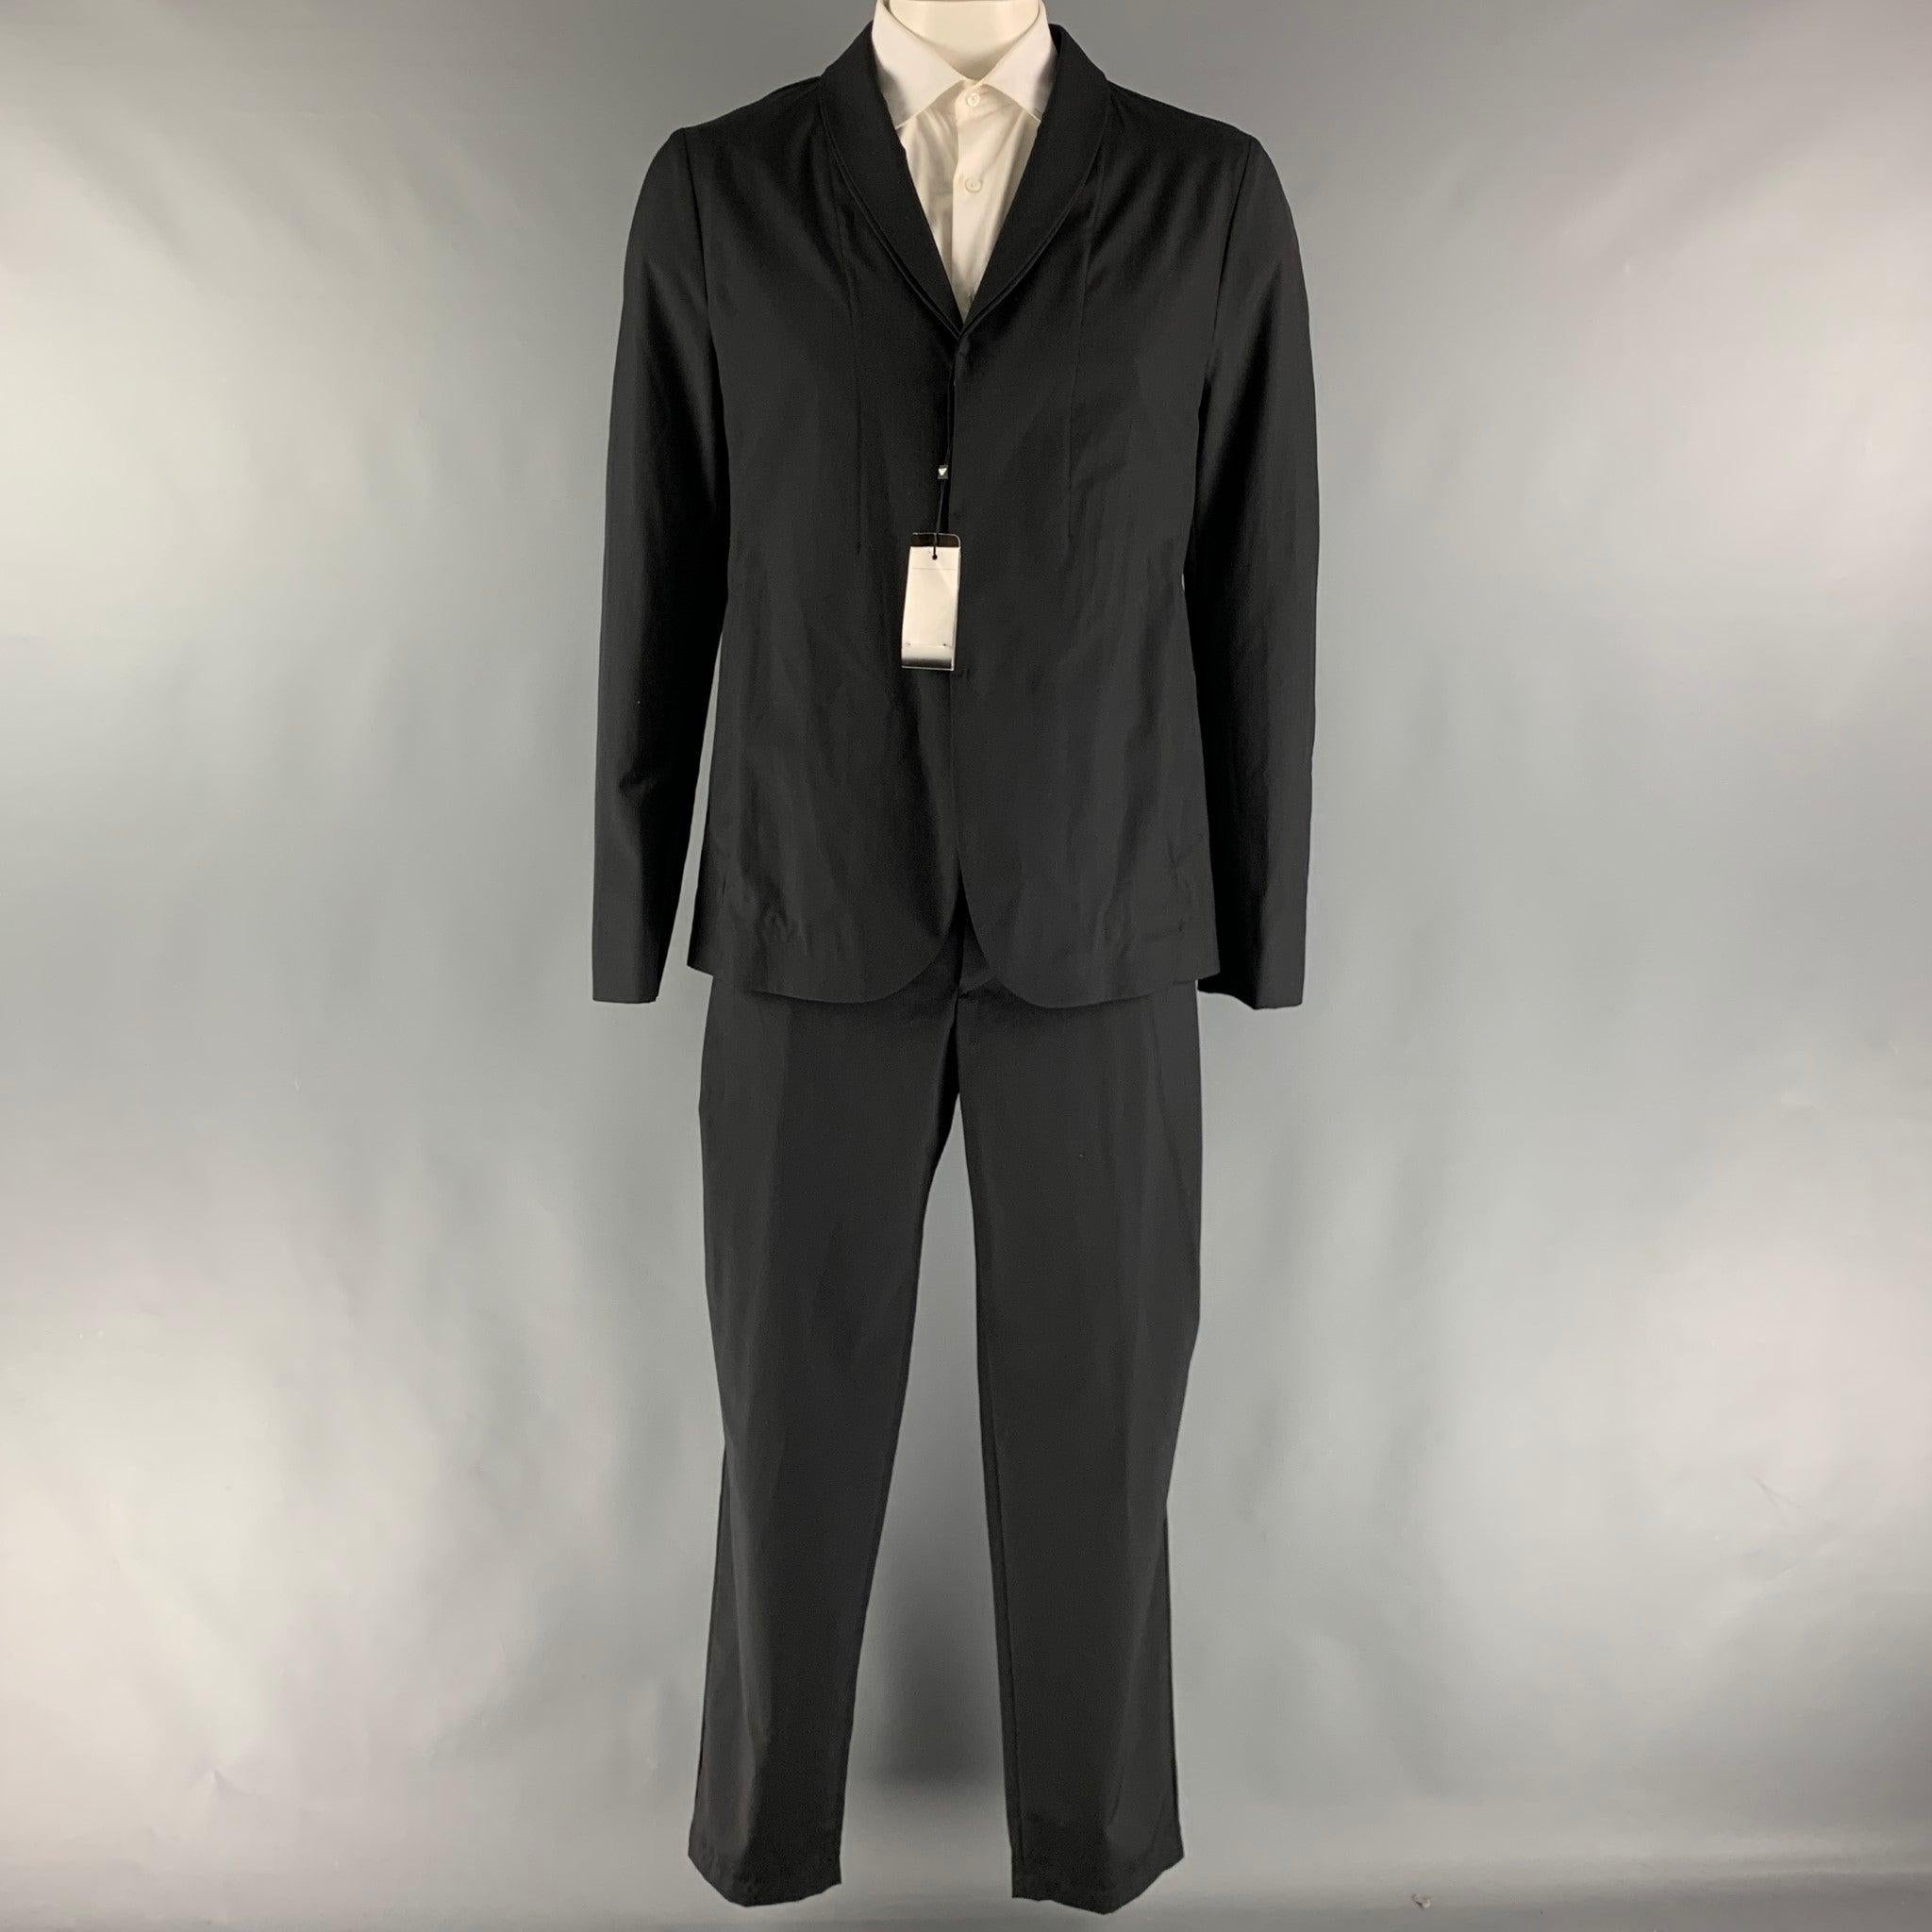 EMPORIO ARMANI suit comes in a black wool and silk woven material with a no lining and includes a single breasted, hidden placket button sport coat with a shawl collar and matching adjustable waistband trousers.
Made in Italy.New with Tags.